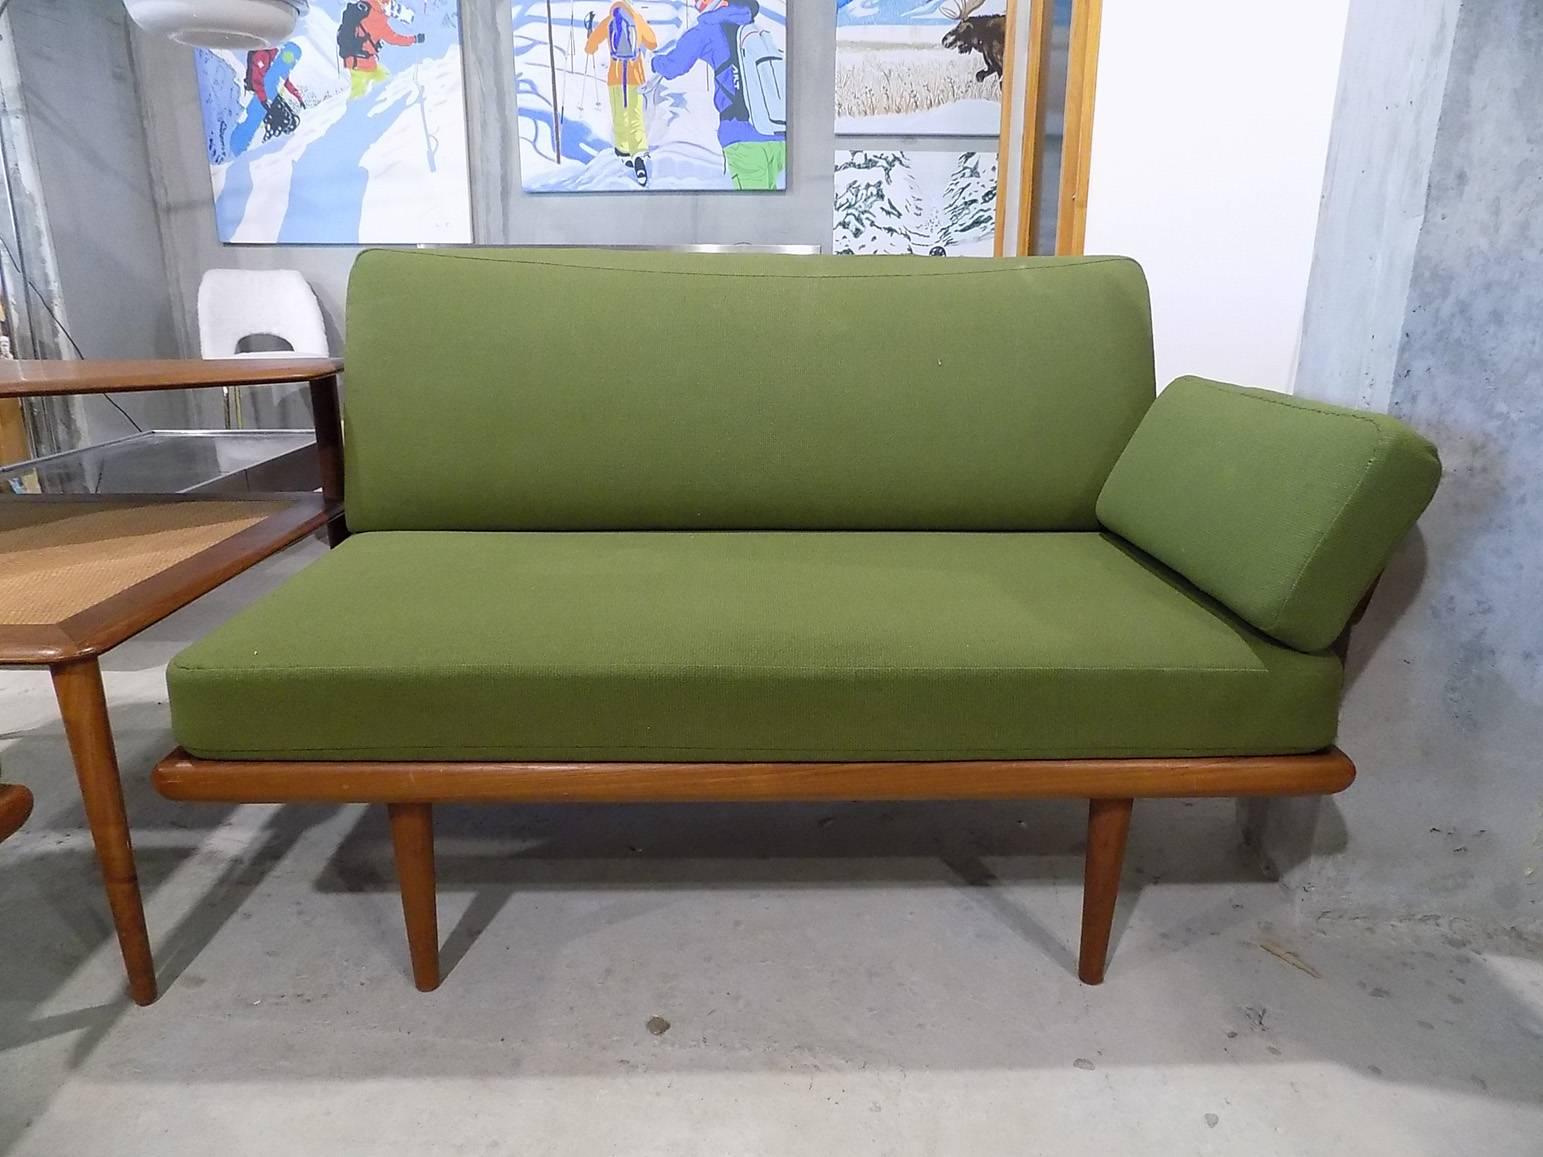 Very good condition
Each sofa are 122cm x 77cm height 80cm
Table is 77cm x 77cm x 64 cm height.